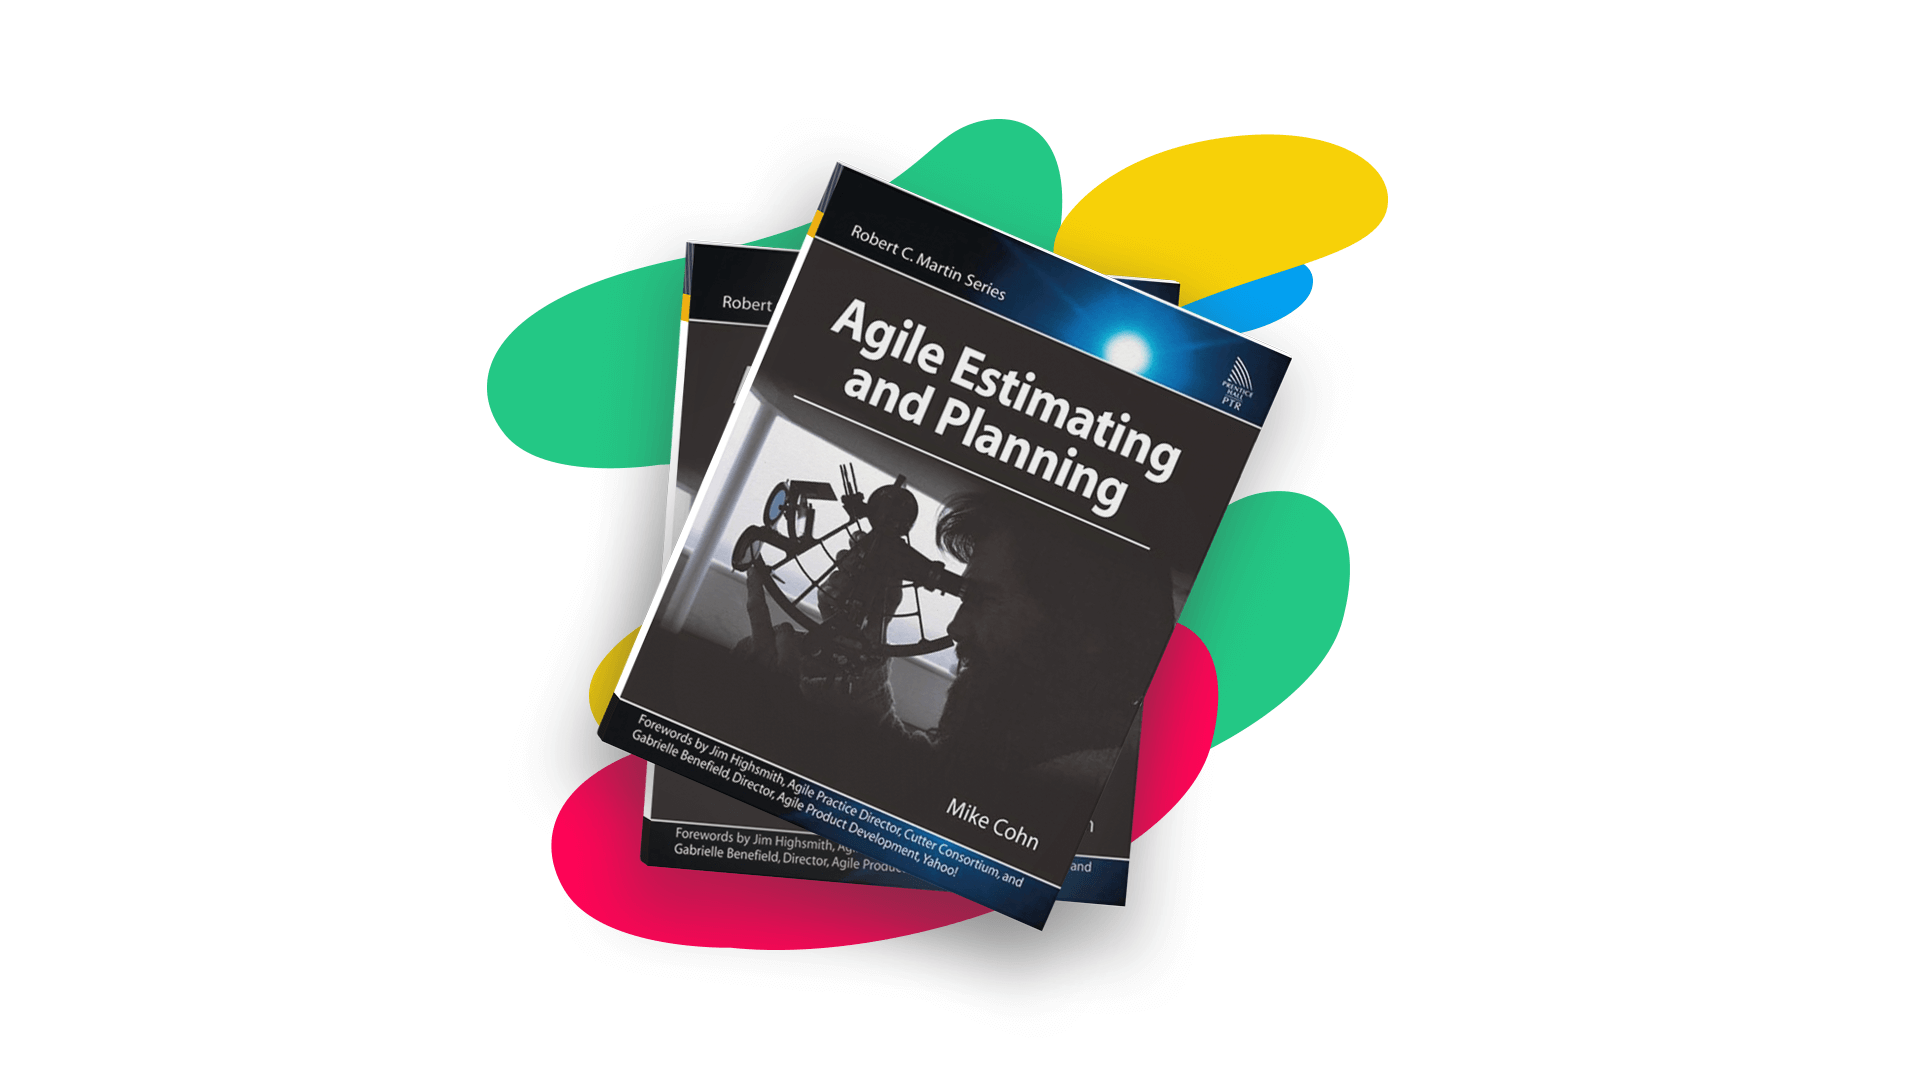 Agile Estimating and Planning book cover